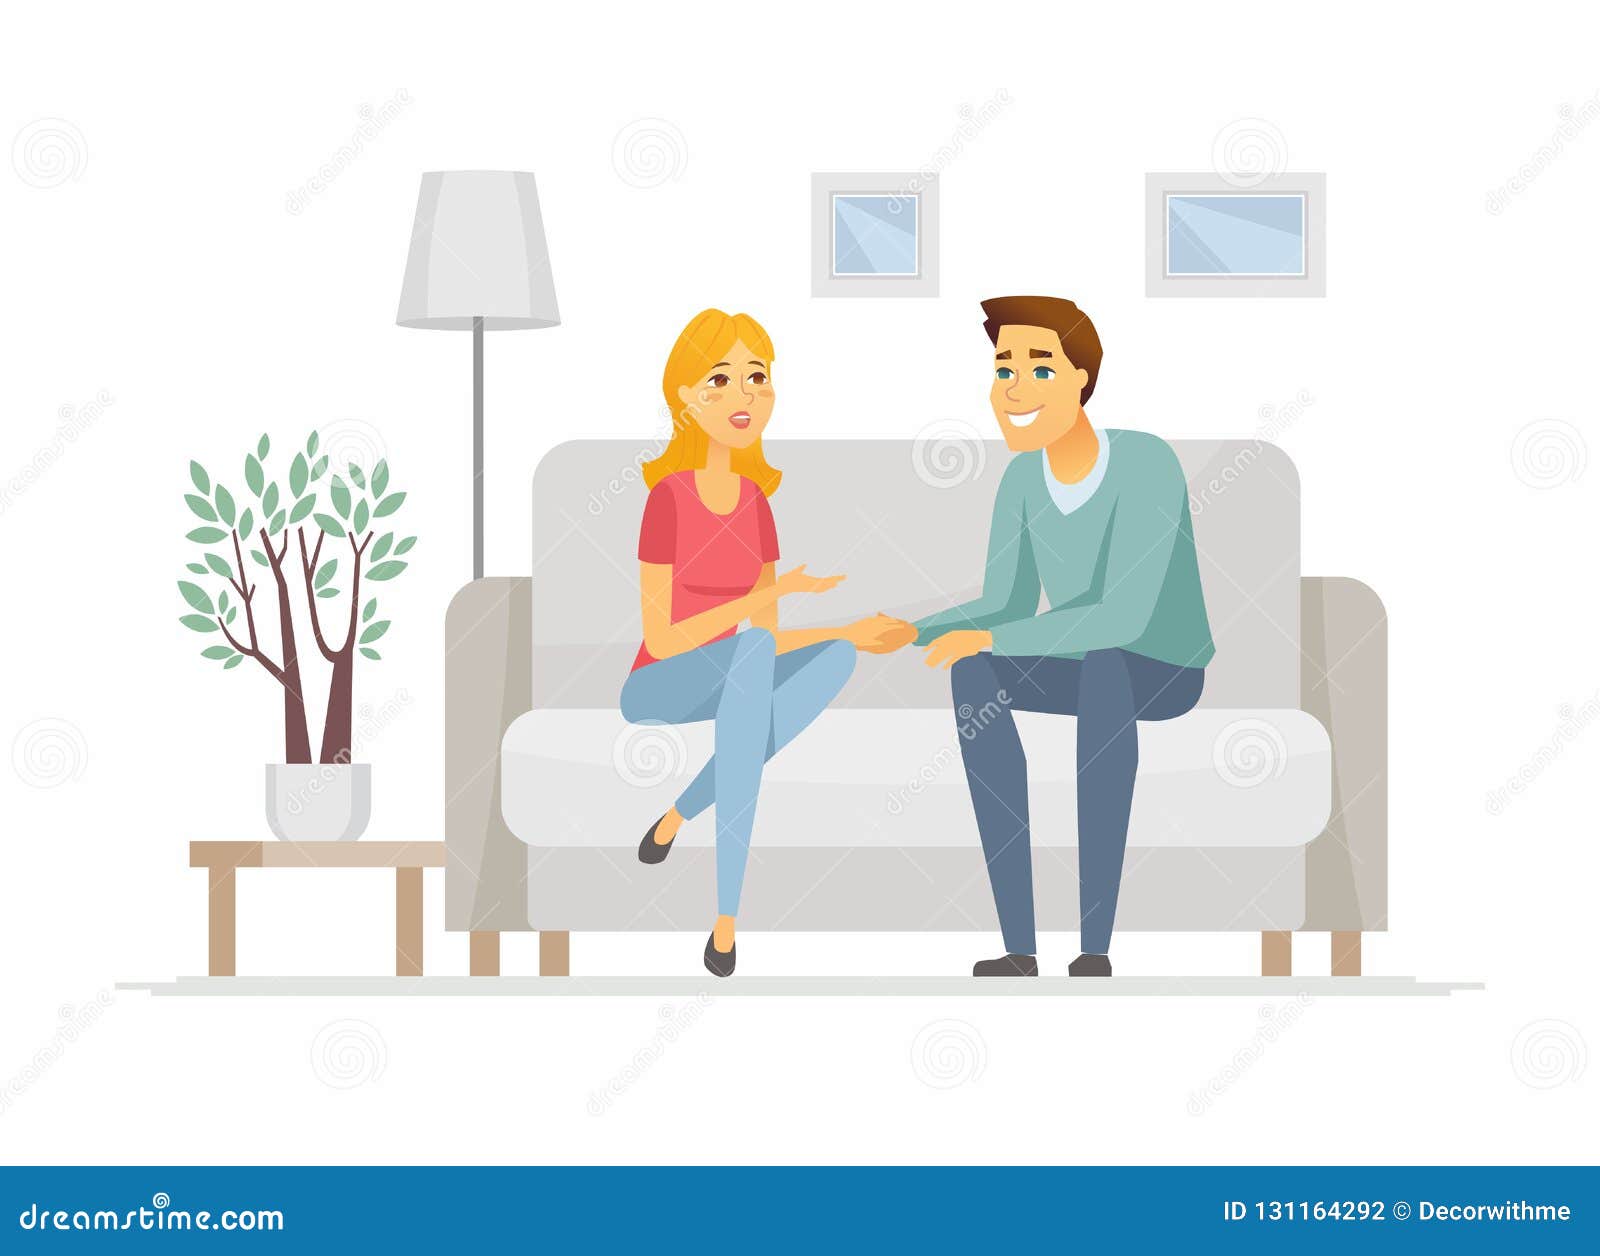 Young Family Talking - Cartoon People Characters Illustration Stock Vector  - Illustration of love, cartoon: 131164292